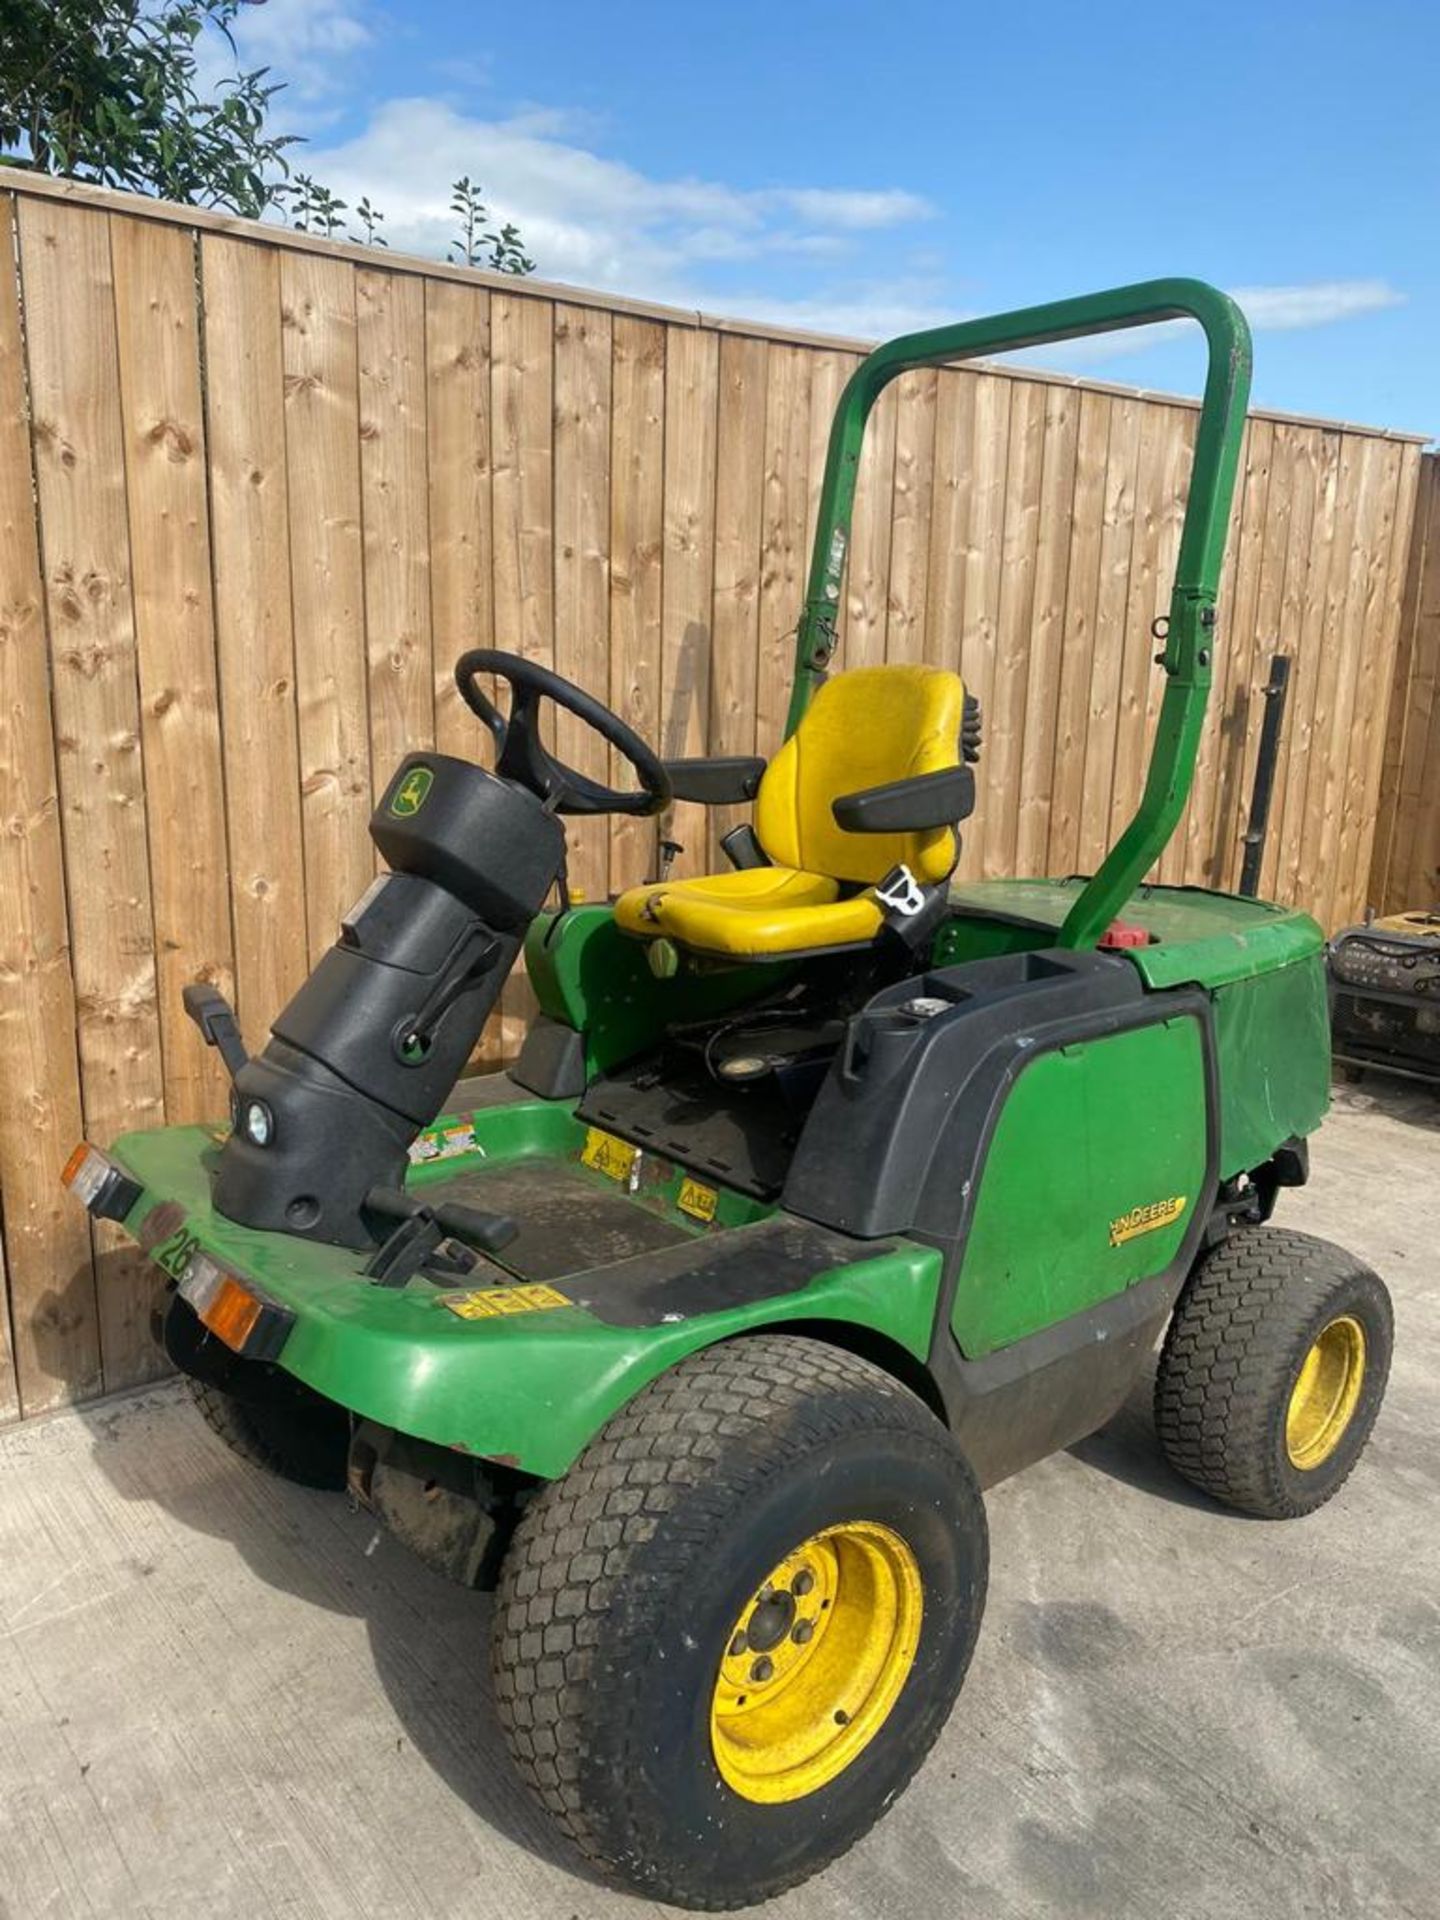 2013 "63" JOHN DEERE 1545 OUTFRONT MOWER LOCATION: NORTH YORKSHIRE - Image 5 of 8